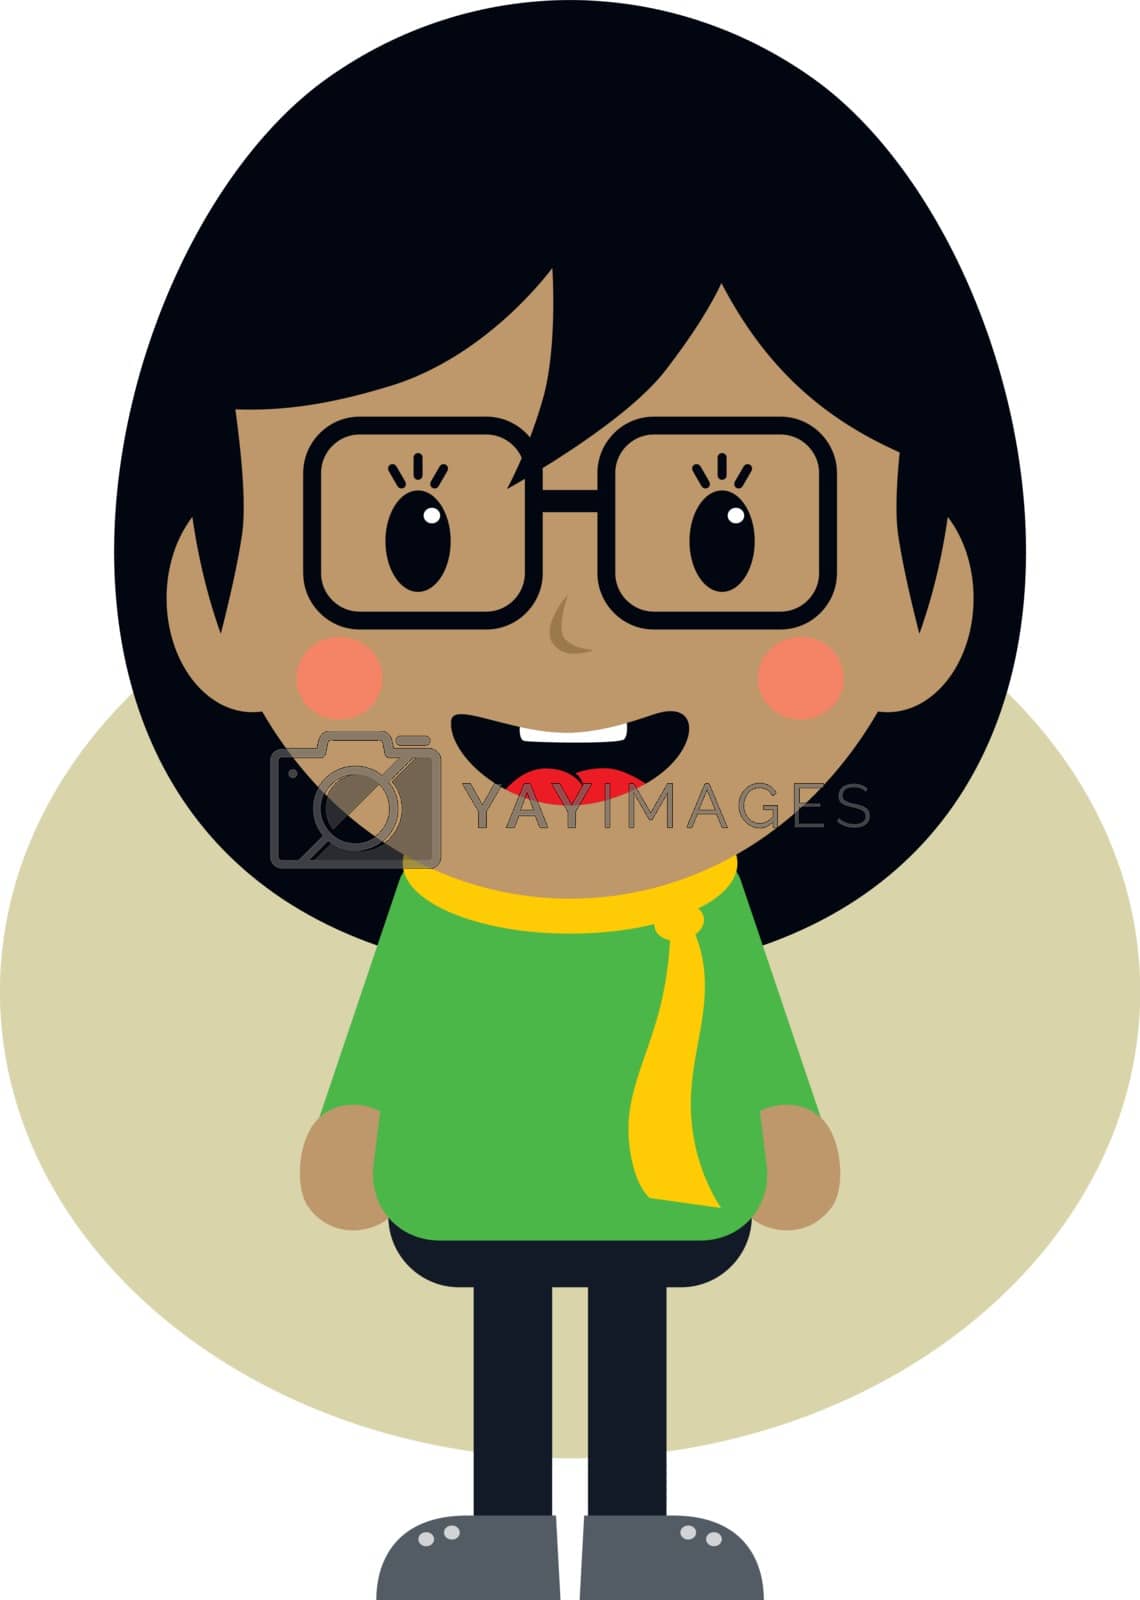 Royalty free image of cute girl cartoon character by vector1st